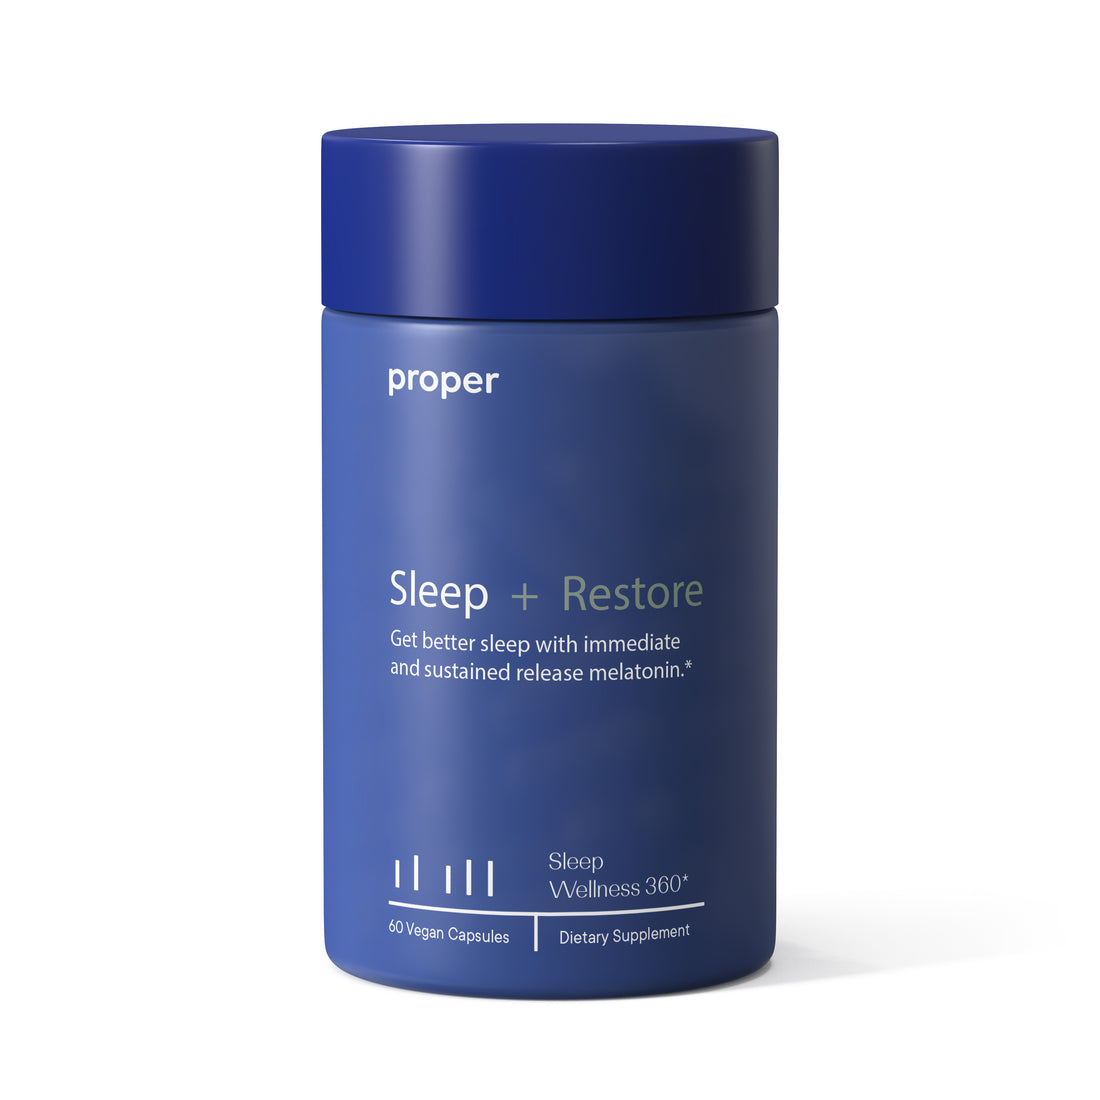 Photograph of the Proper Sleep + Restore bottle from front, highlighting that it contains both immediate and sustained release melatoning and contains 60 vegan capsules.